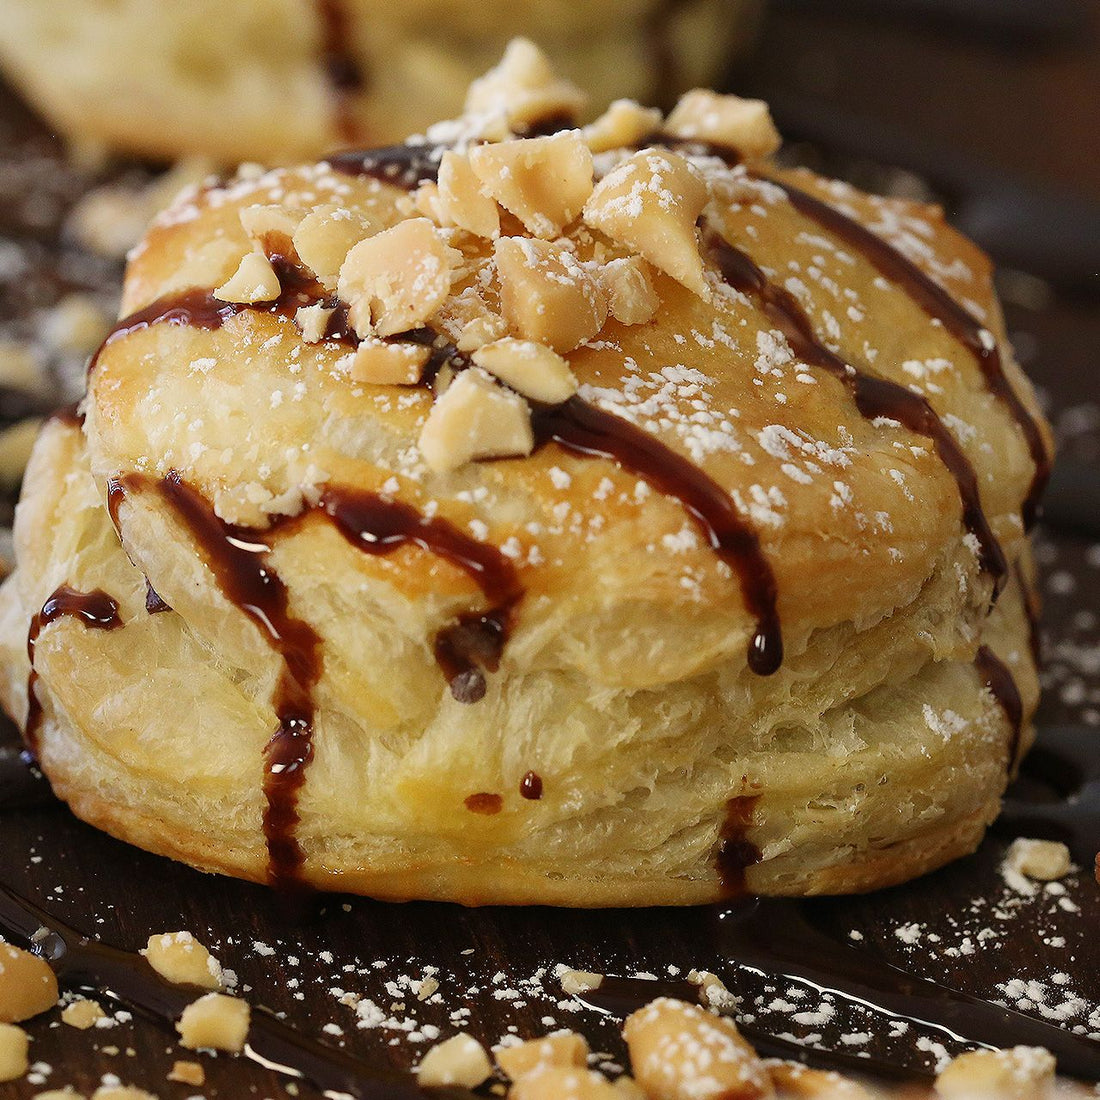 Reese's Stuffed Donuts